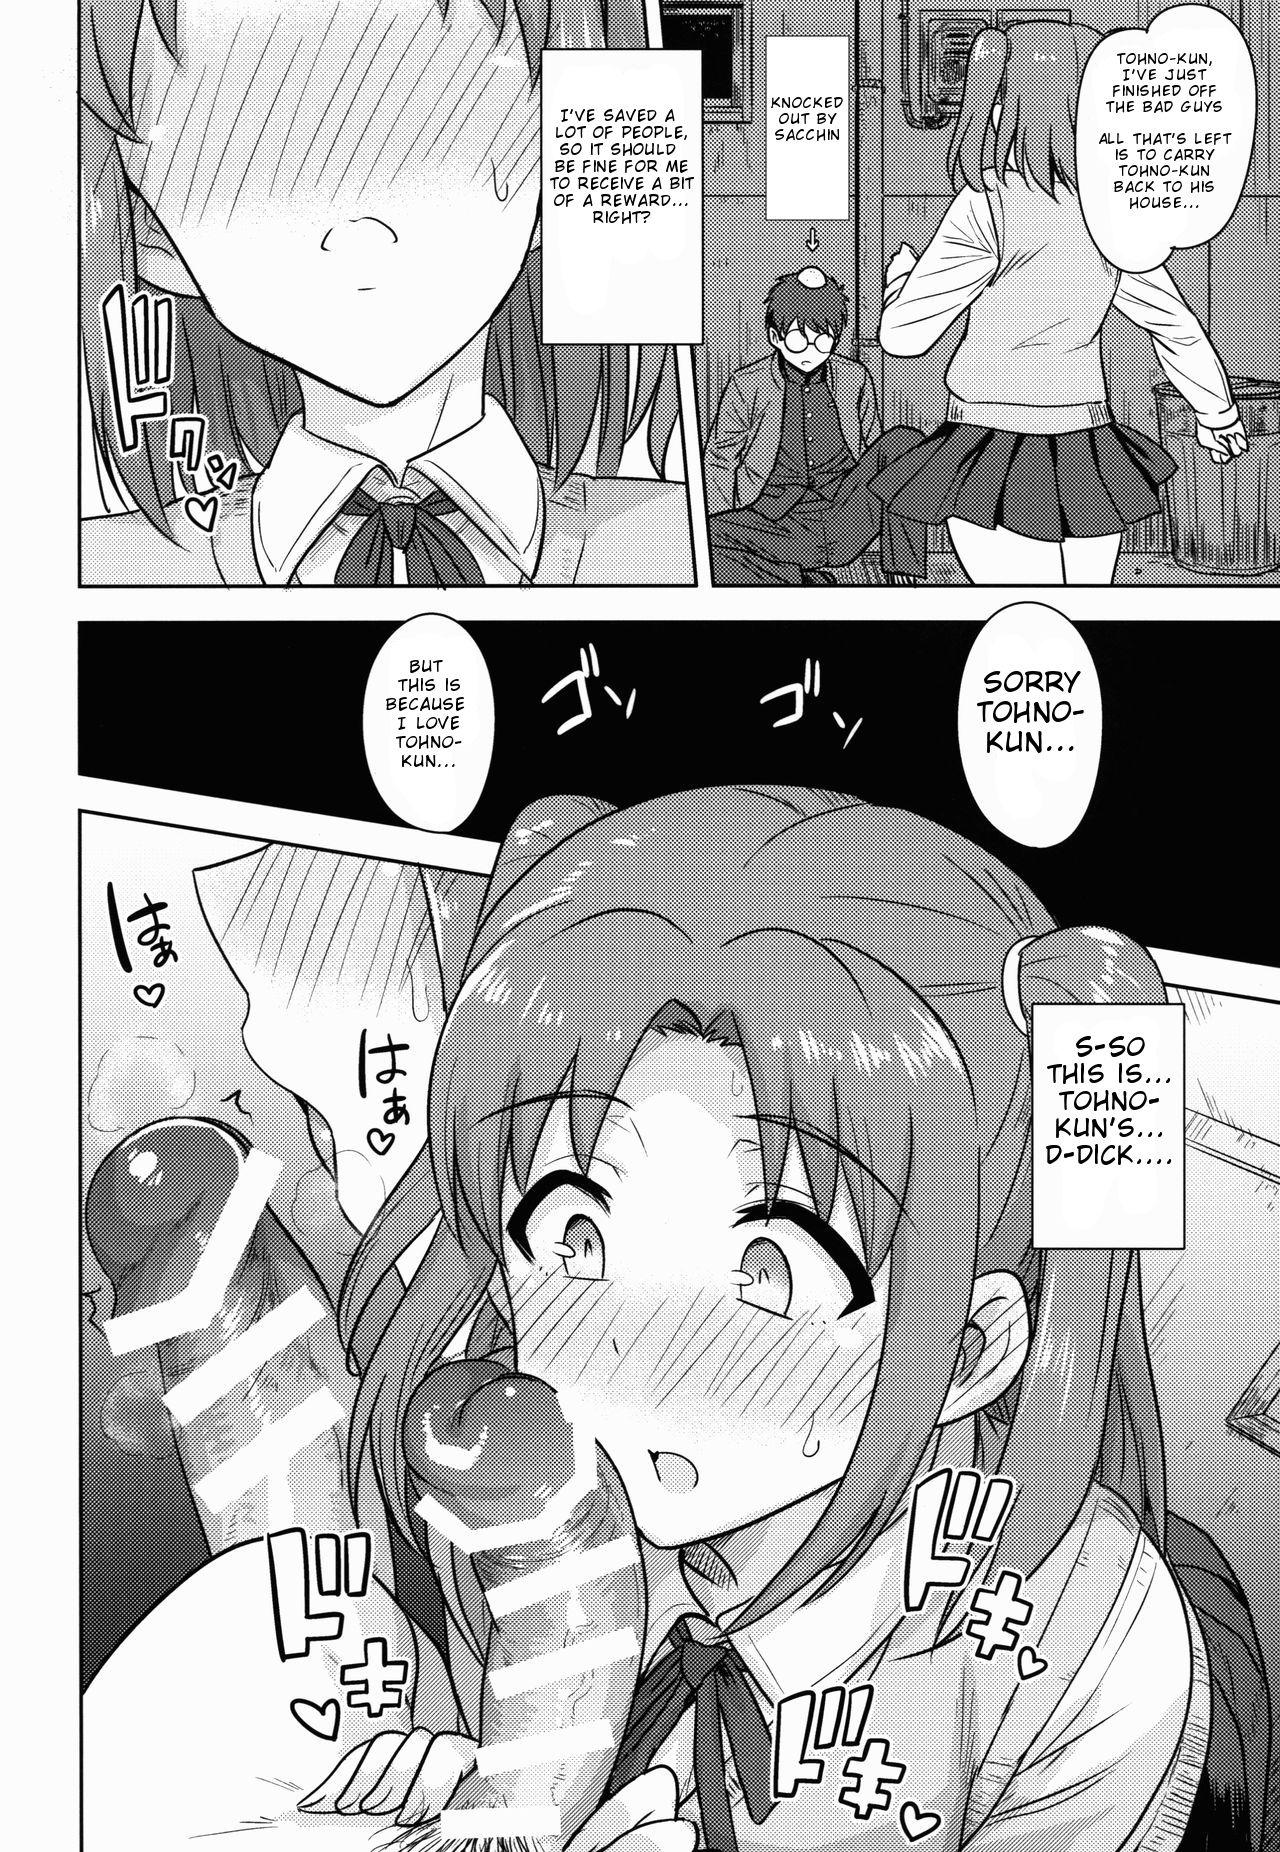 Screaming Aru Hi no Futari MelBlo Hen | A Certain Day with Each Other Melty Blood Hen - Tsukihime Stream - Page 10